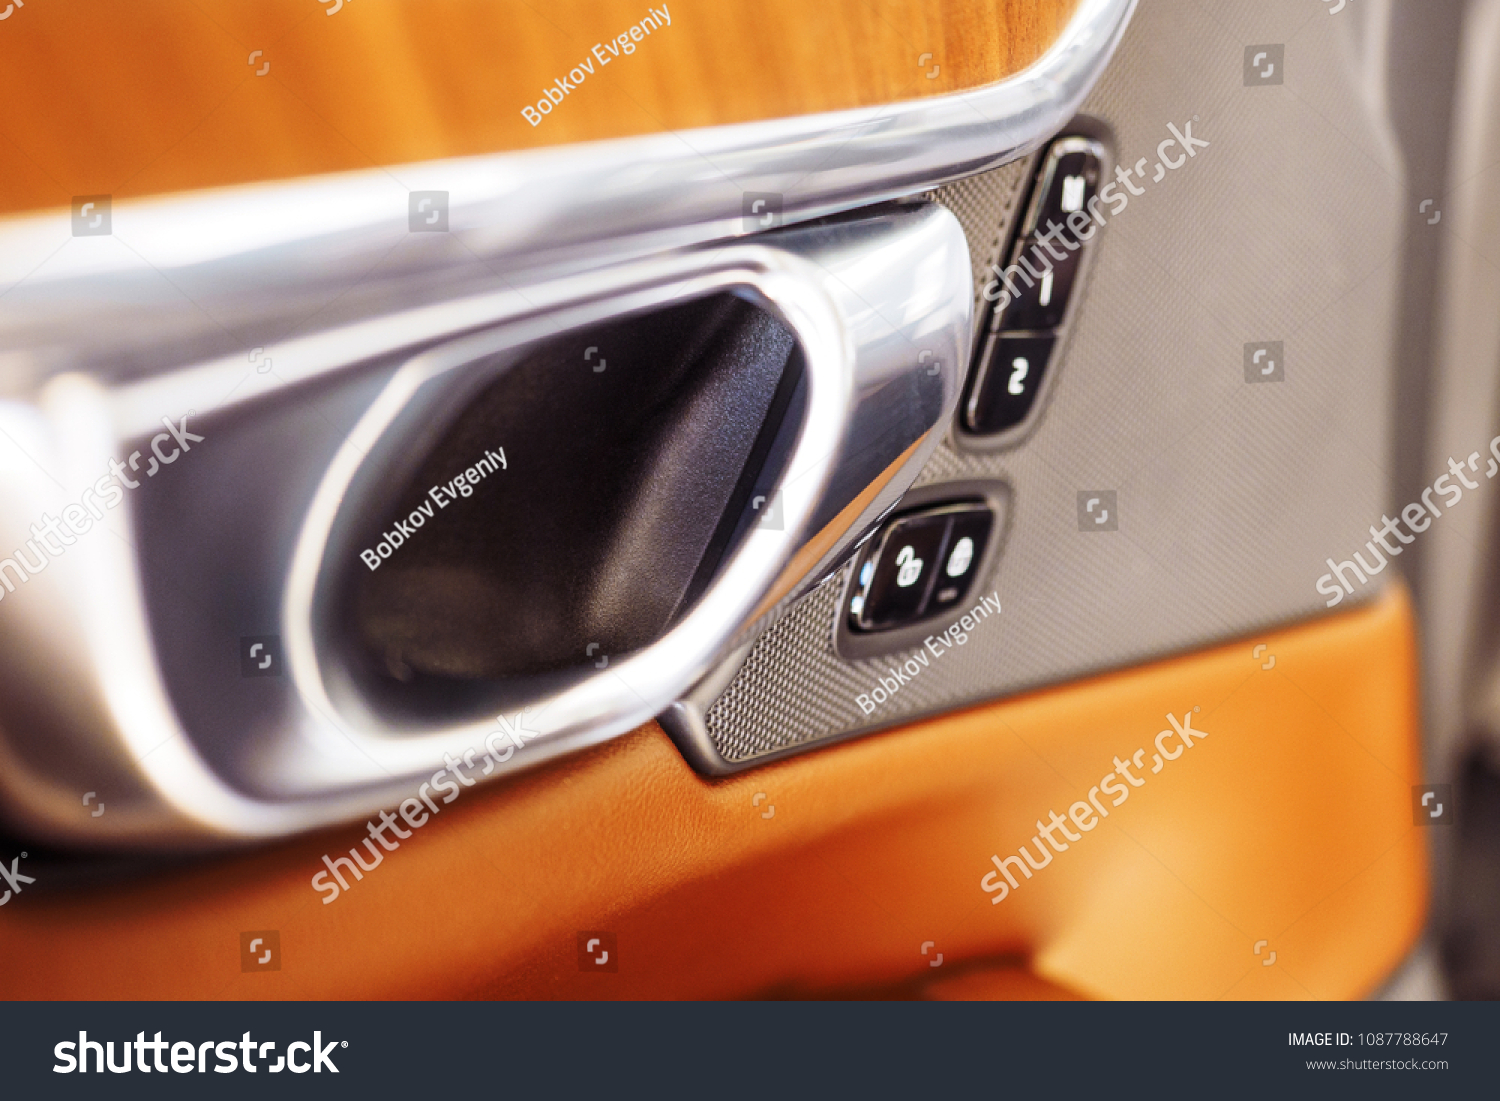 Car Light Brown Leather Interior Details Stock Image